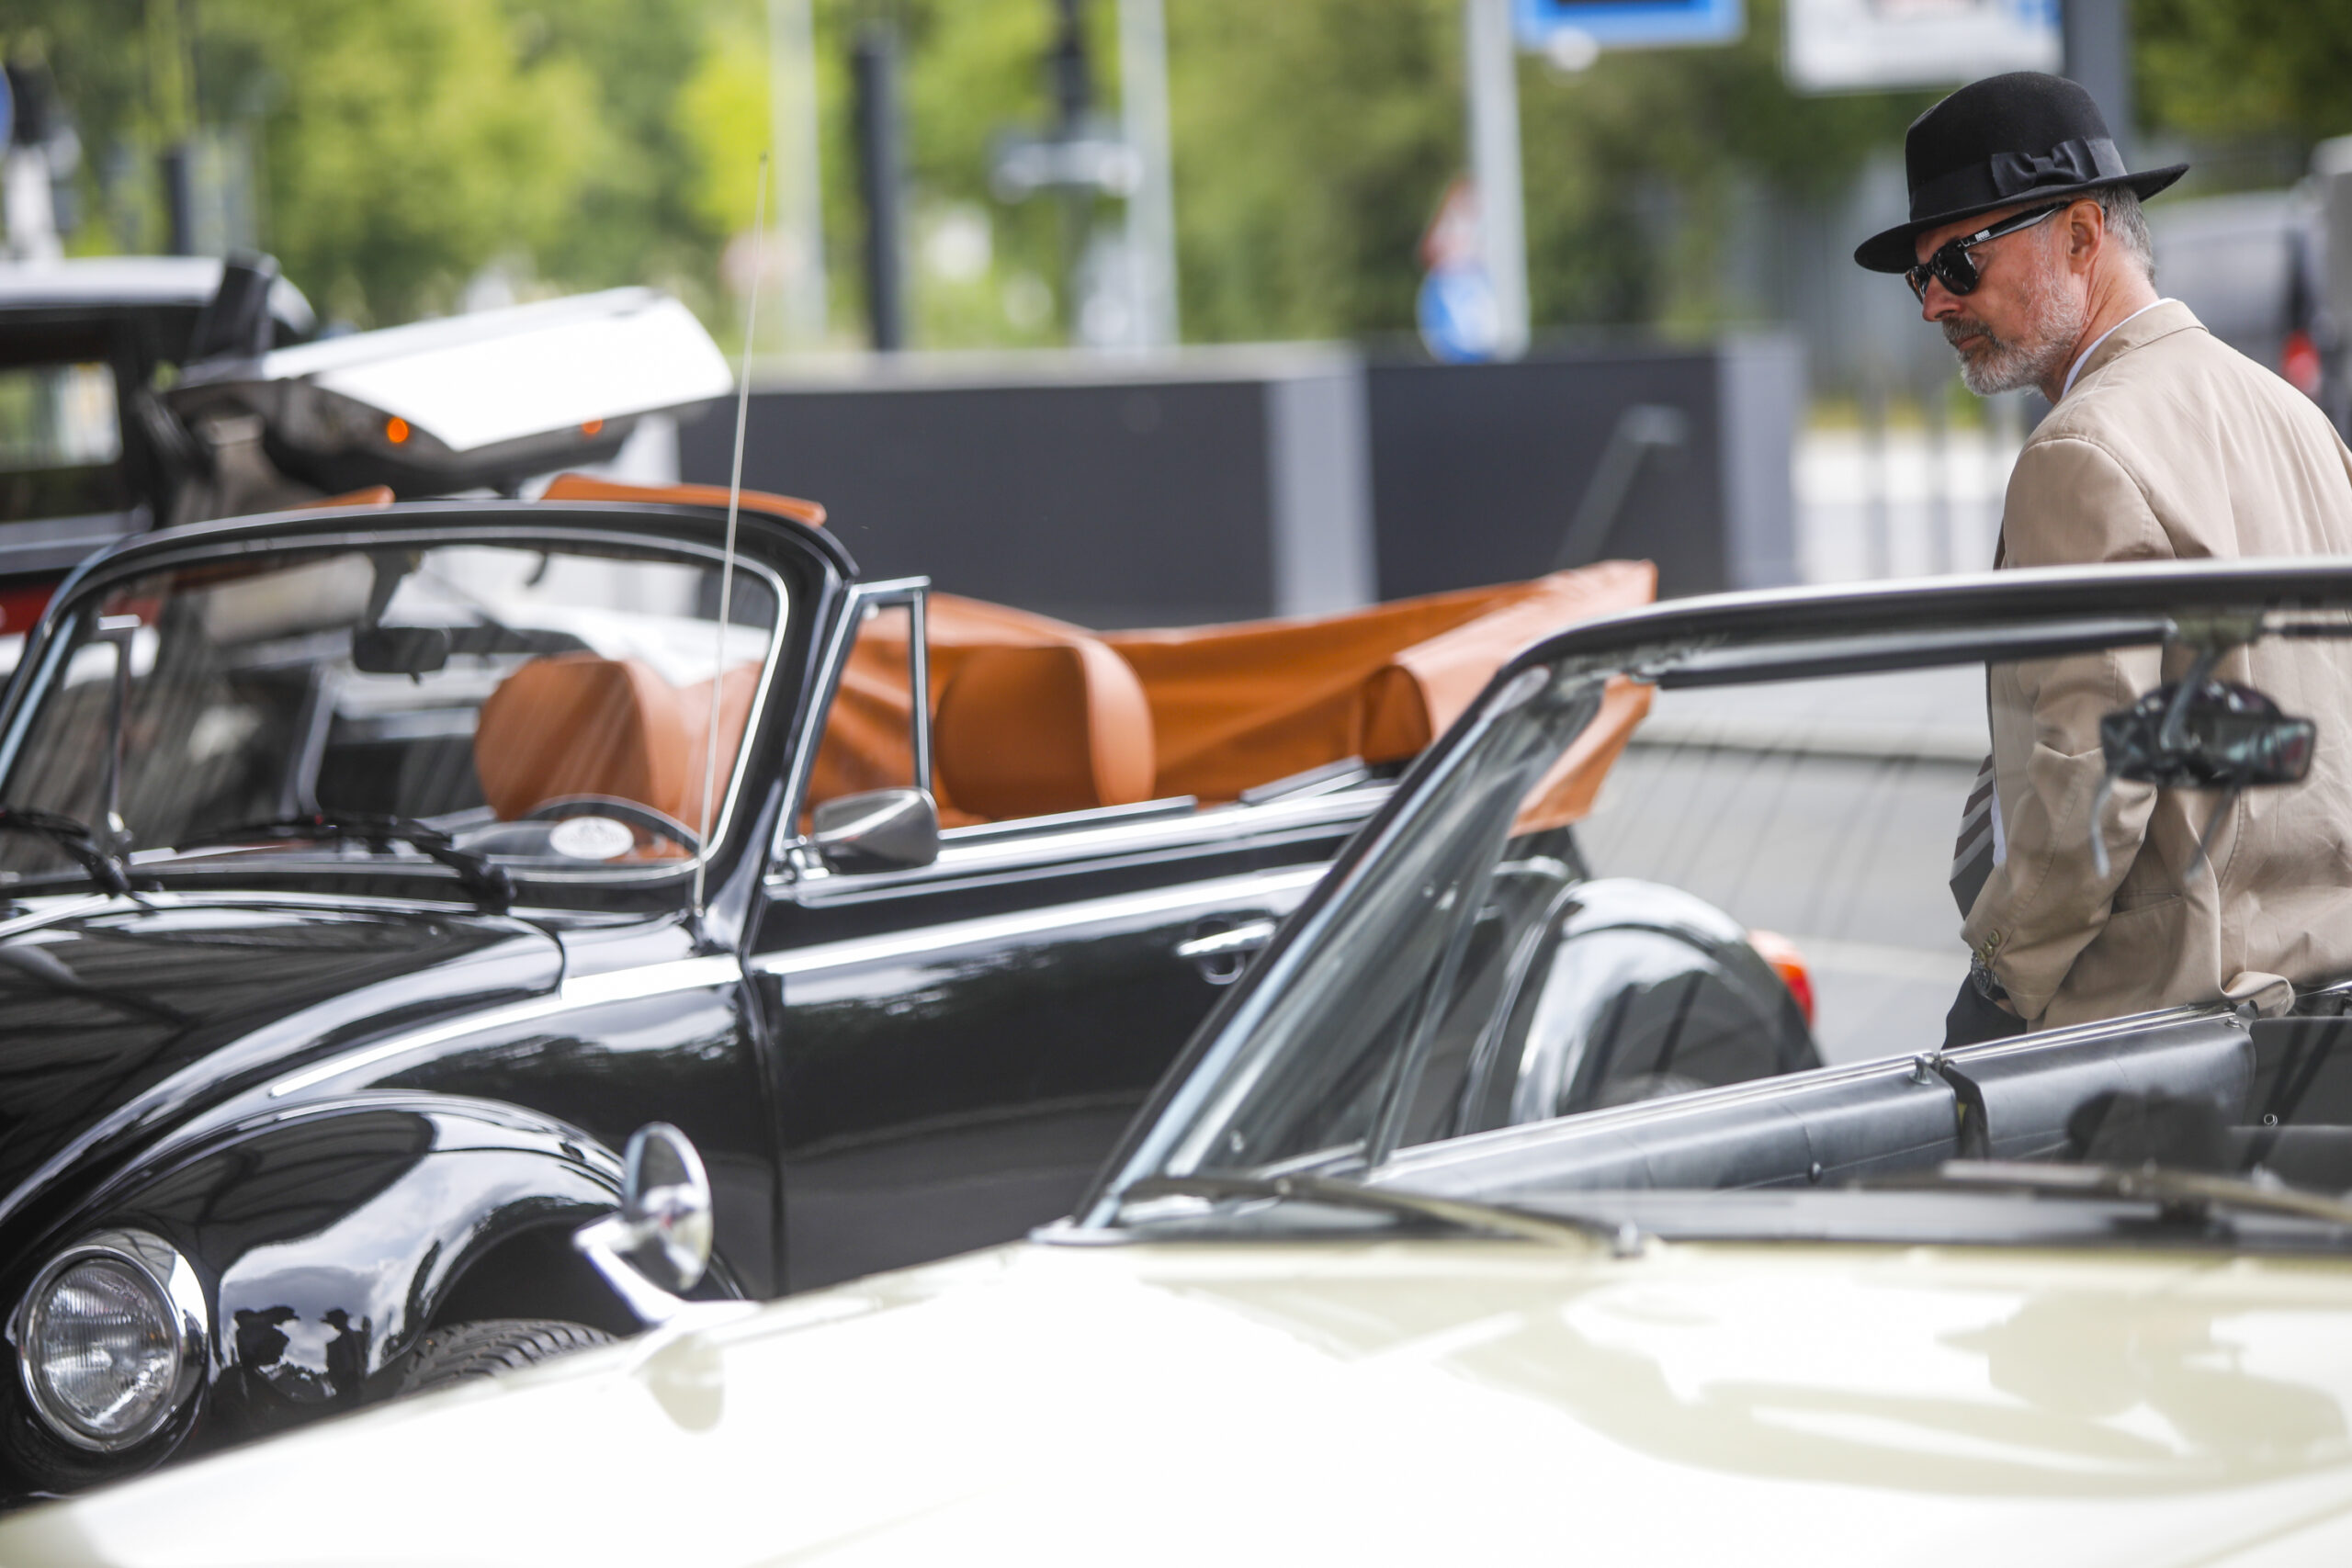 Car fans get all they want at the Classic Days (Photo credit: Messe Düsseldorf/C.Tillmann)